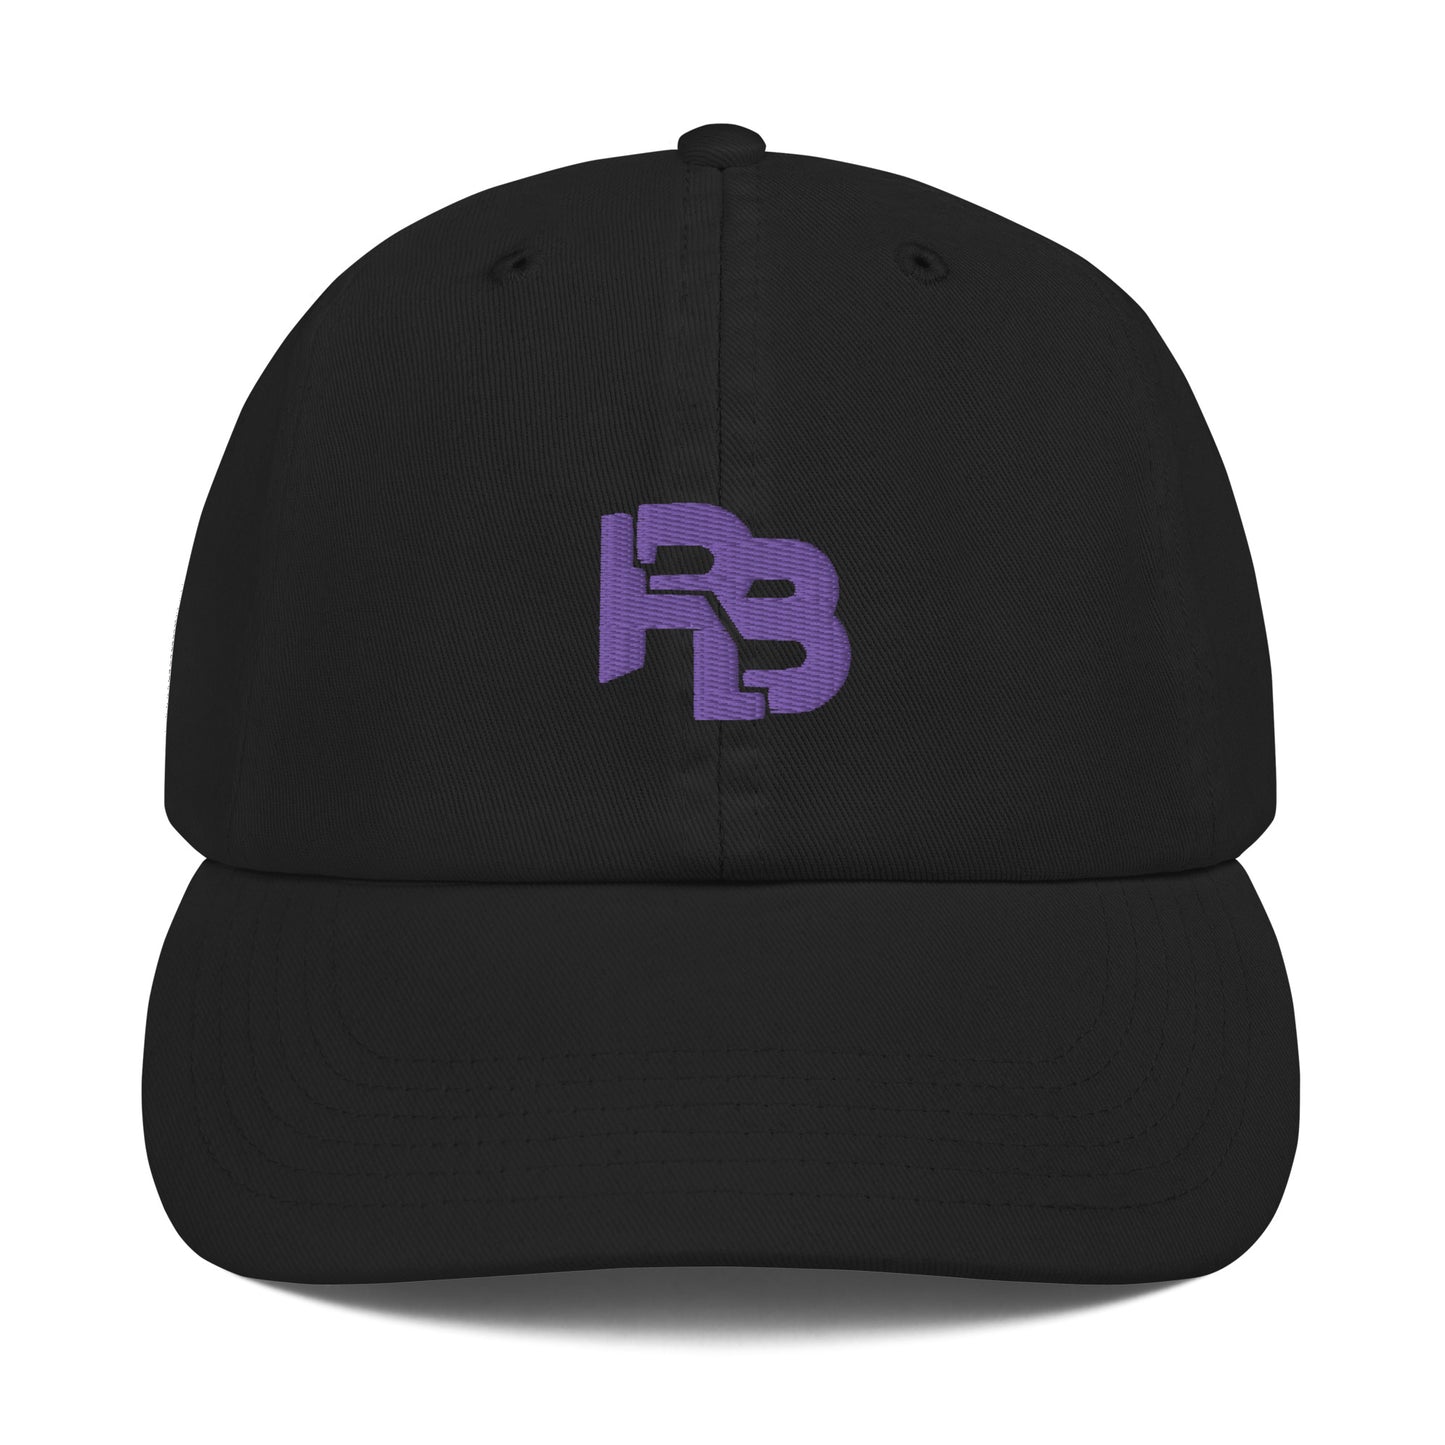 RB Embroidered Champion Dad Cap